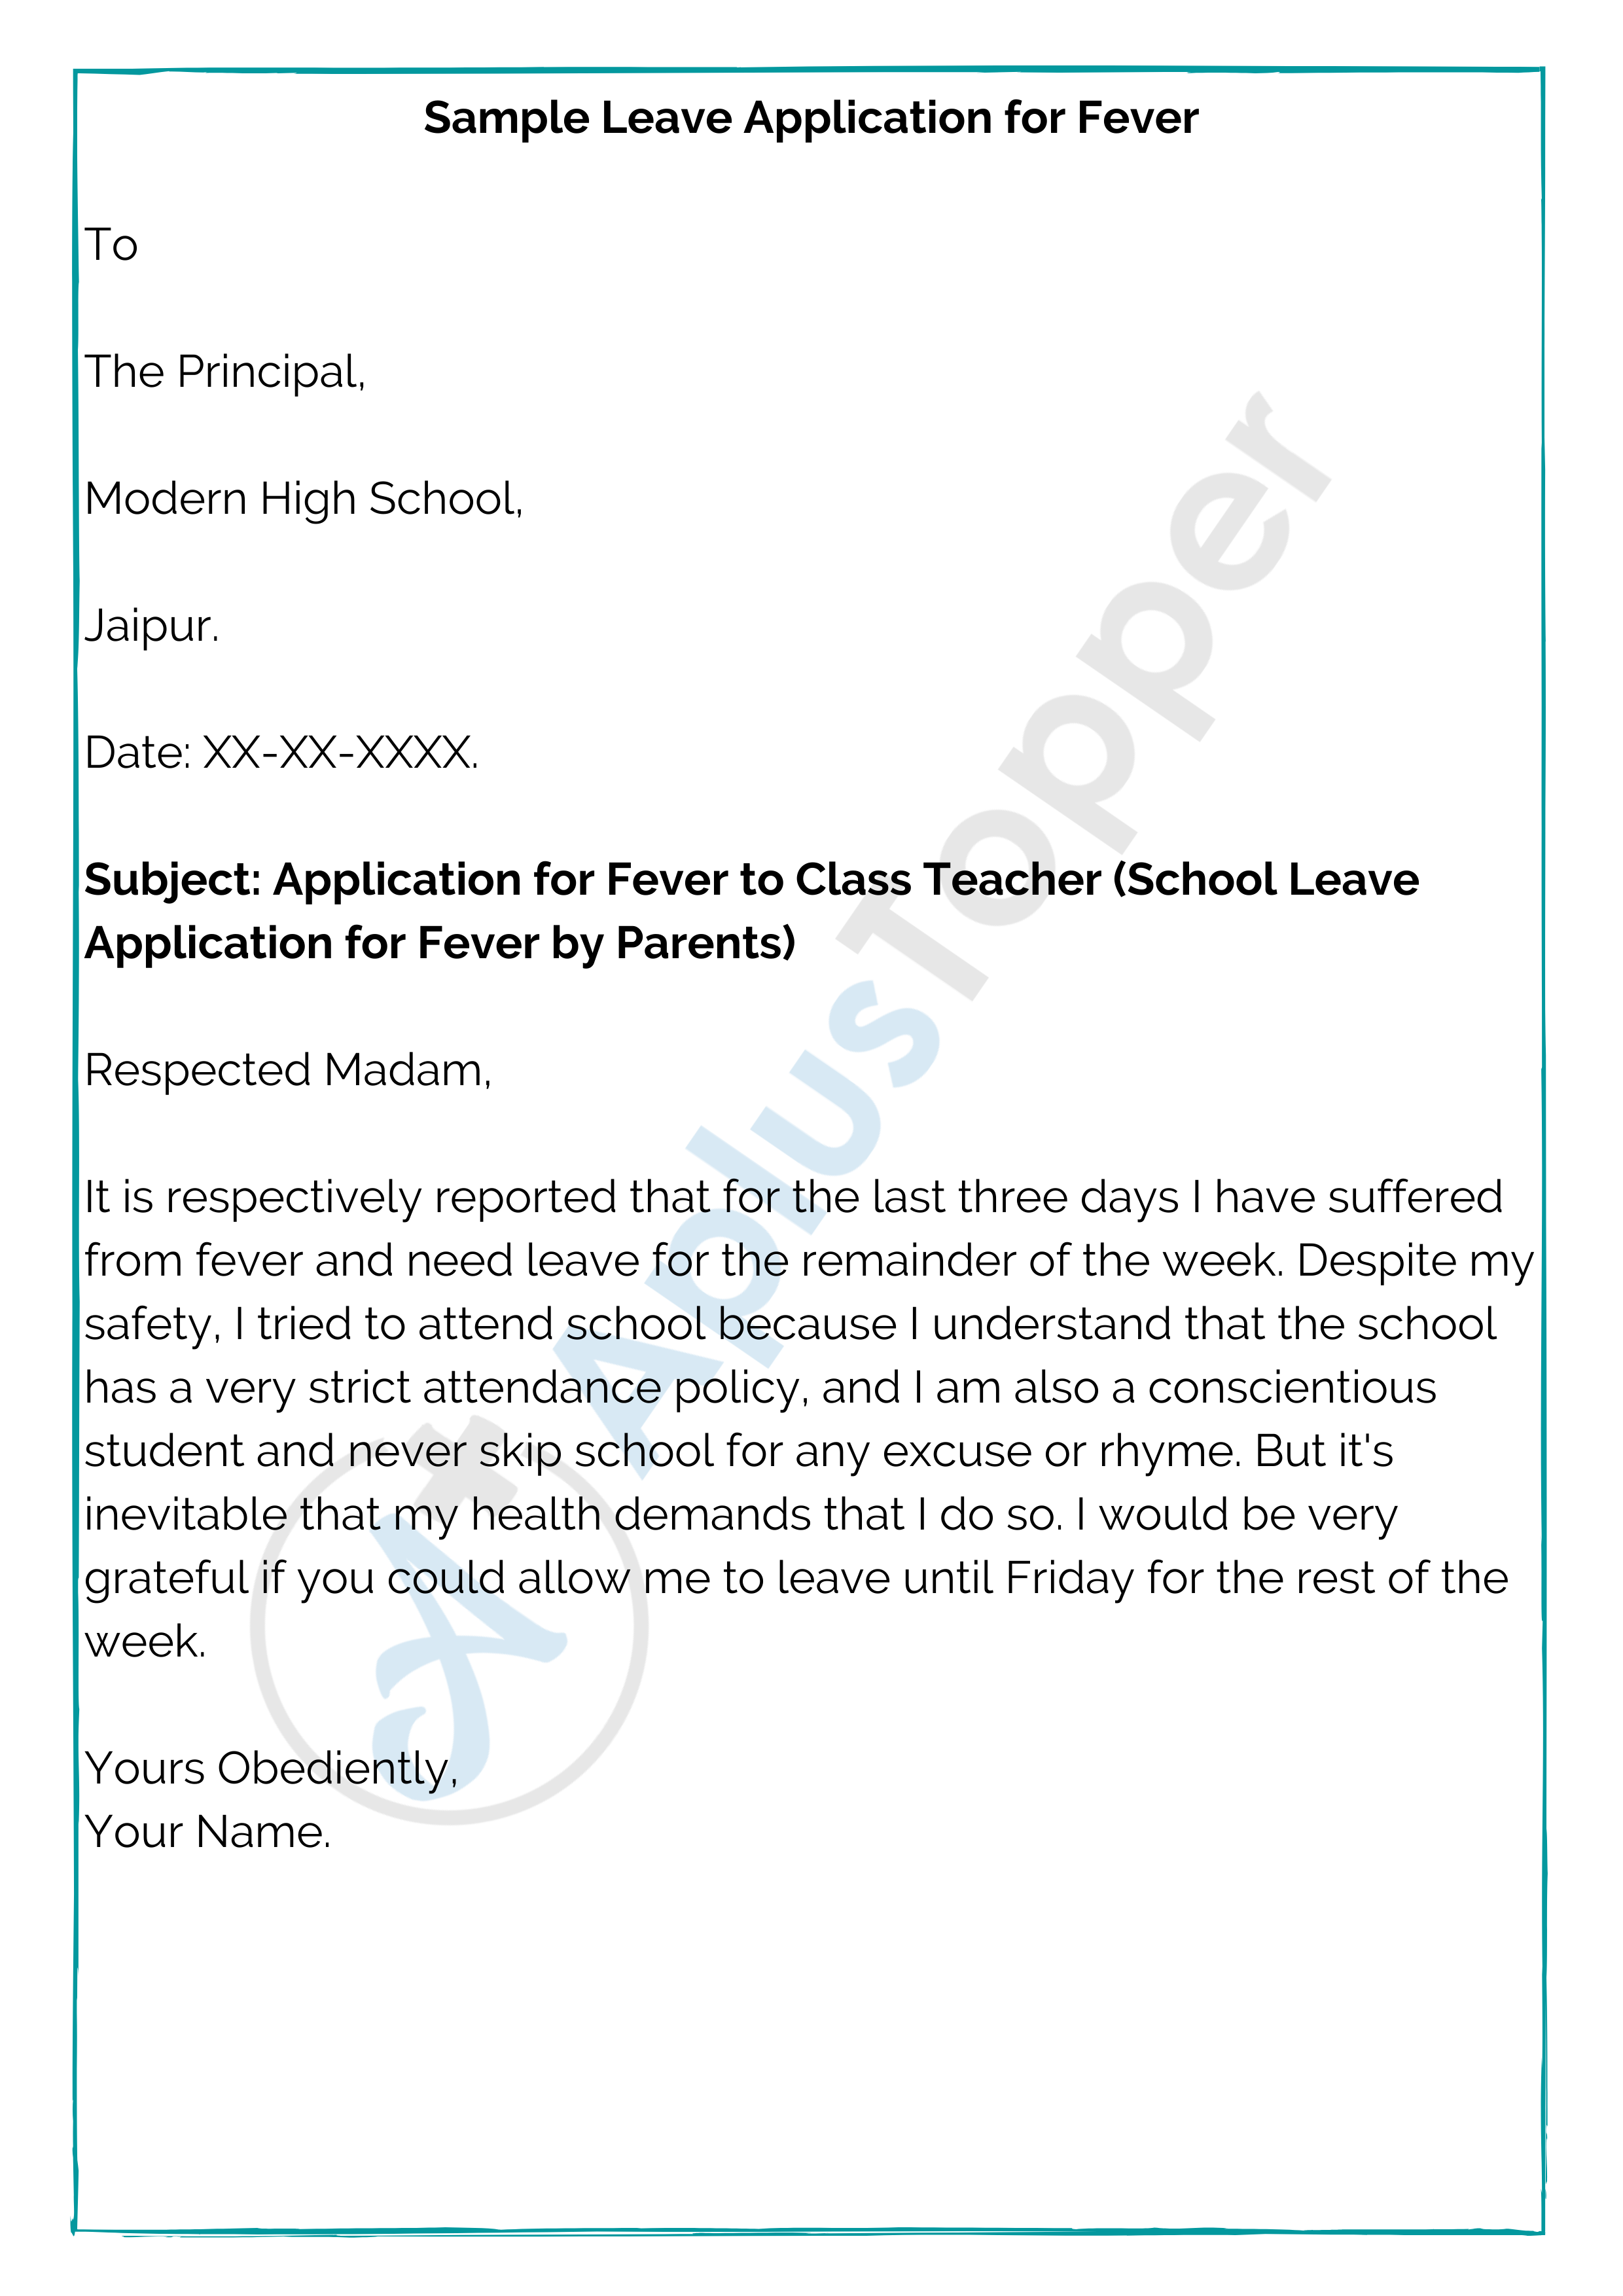 Leave Application For Fever | How To Write Leave Application For Fever - A  Plus Topper